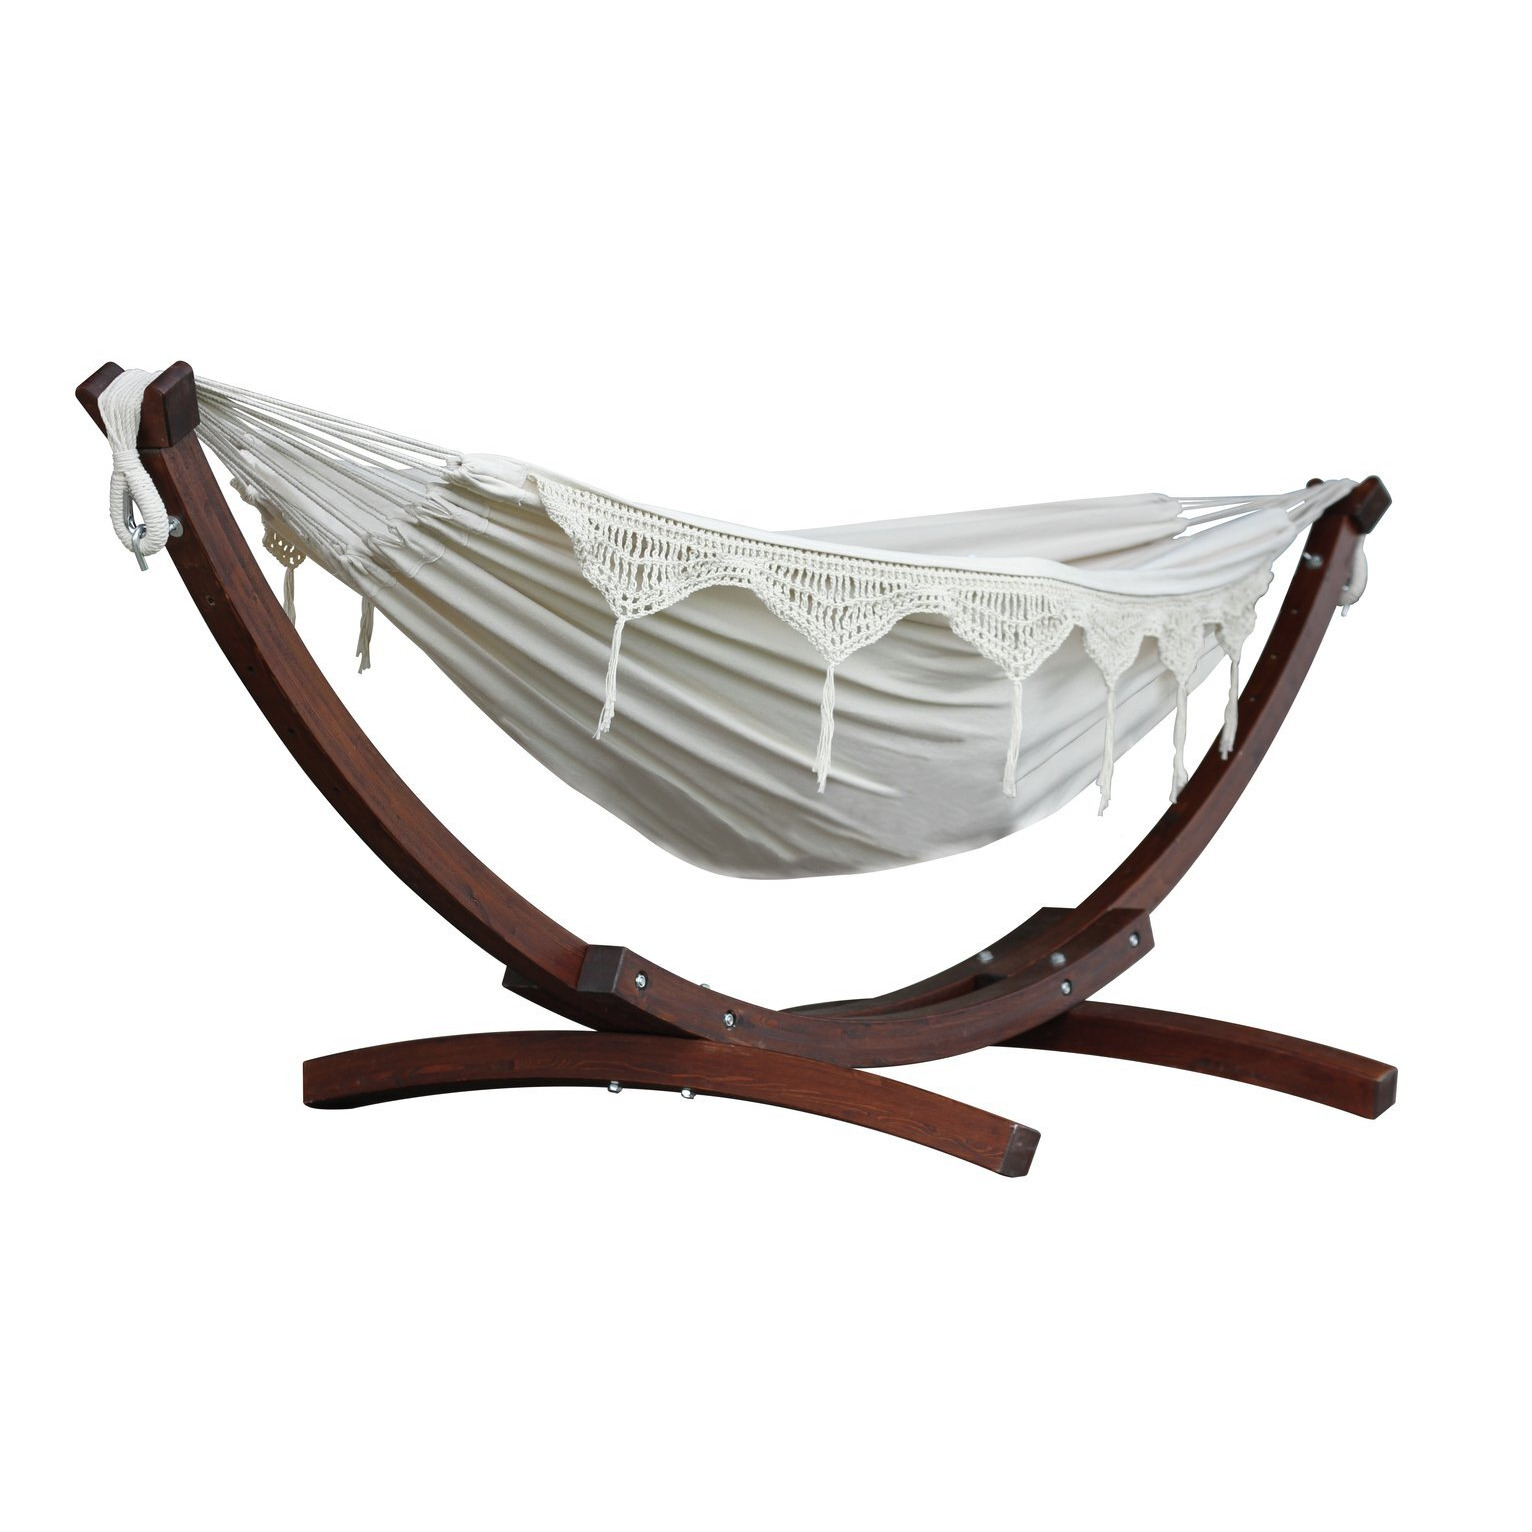 Vivere Hammock with Wooden Stand - Cream - image 1